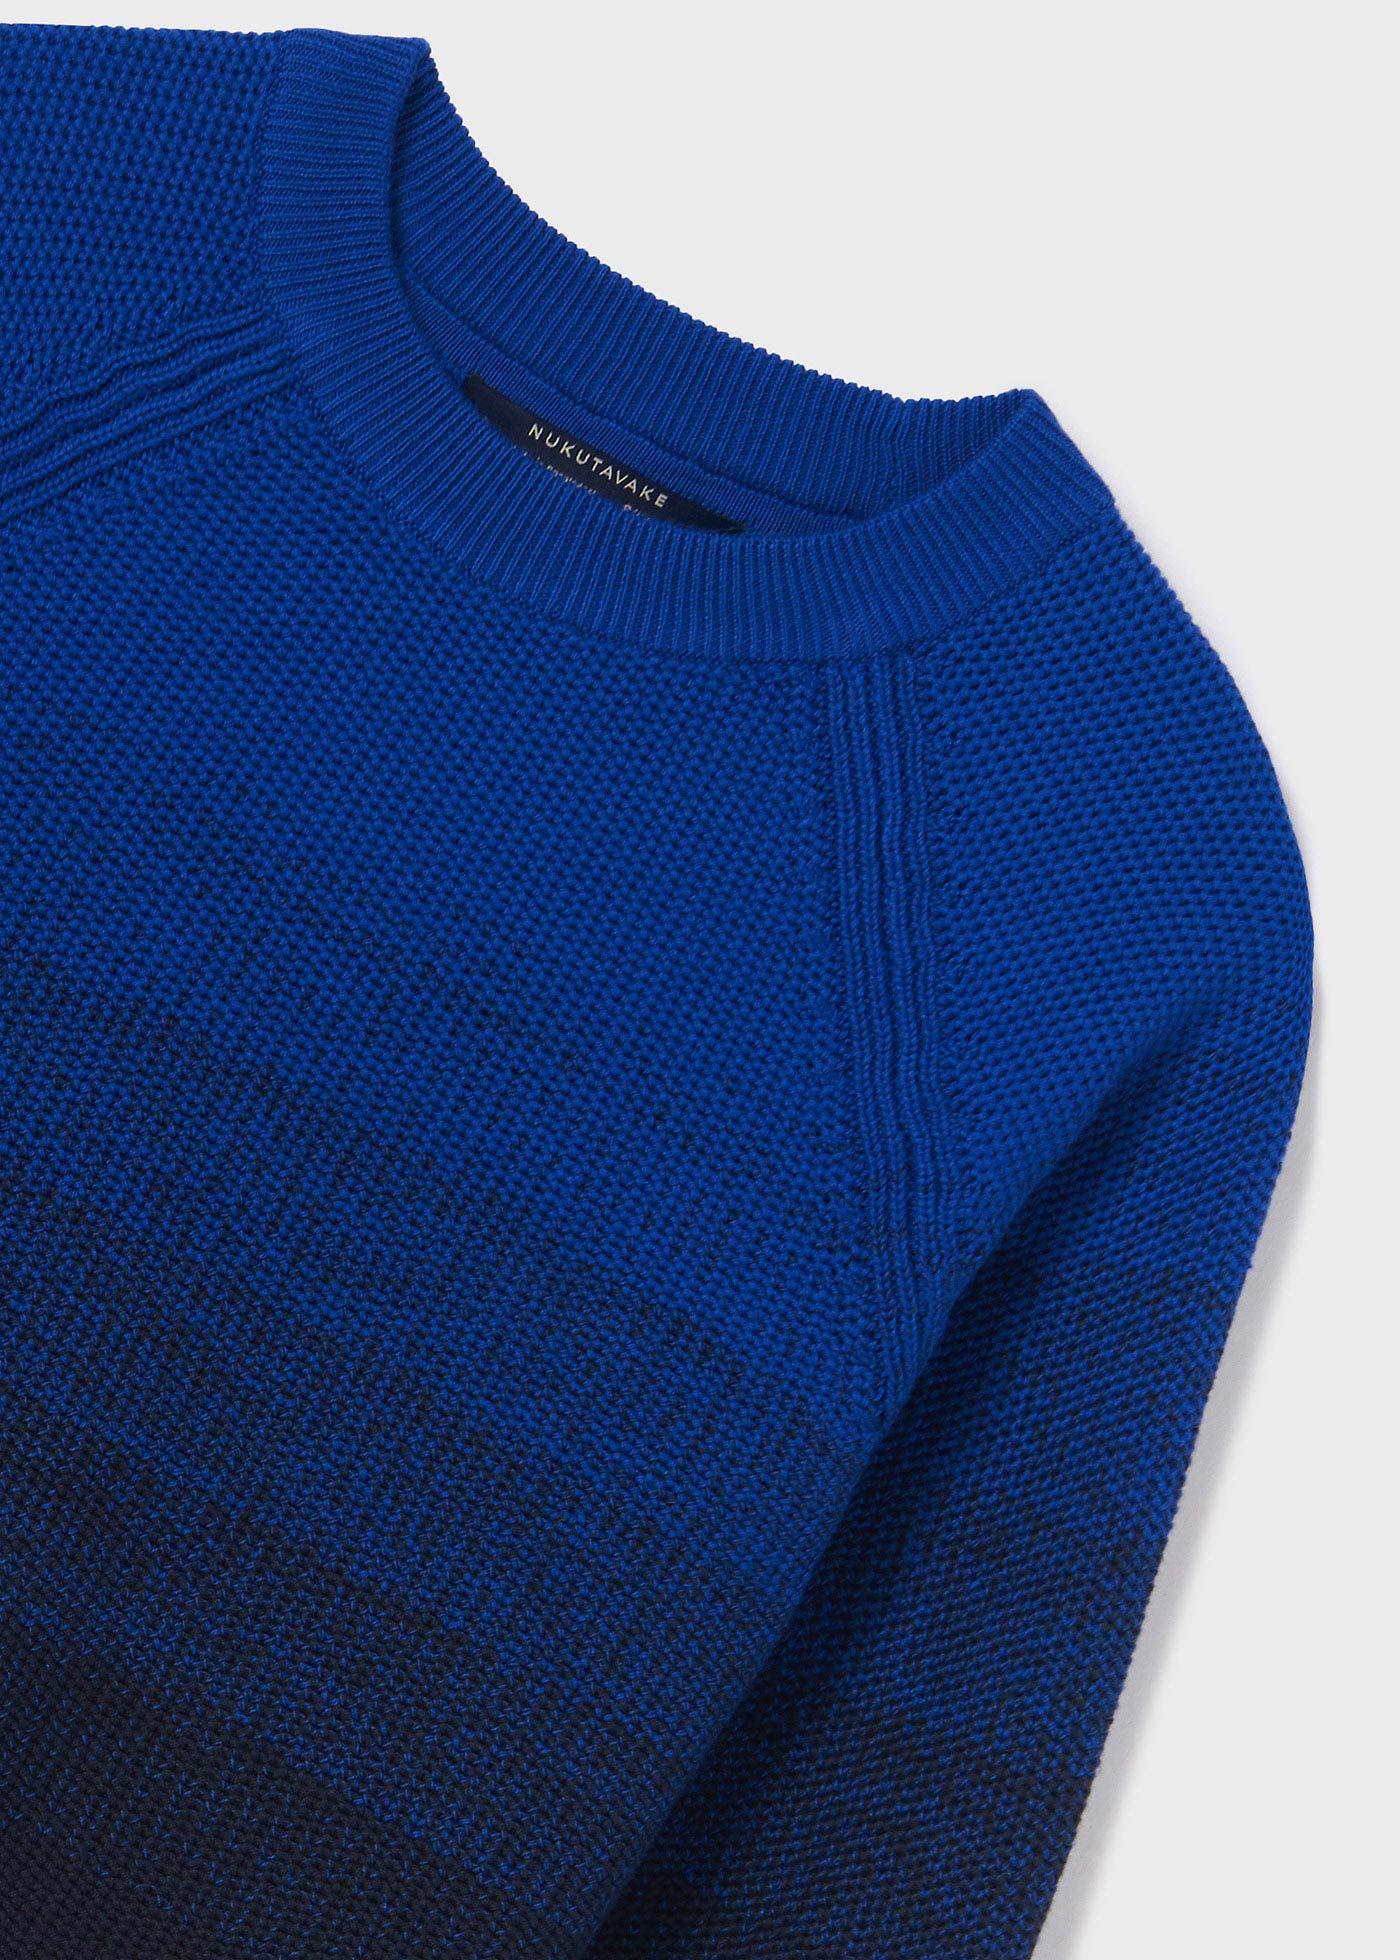 Gradient knit sweater Better Cotton boy | Mayoral ®